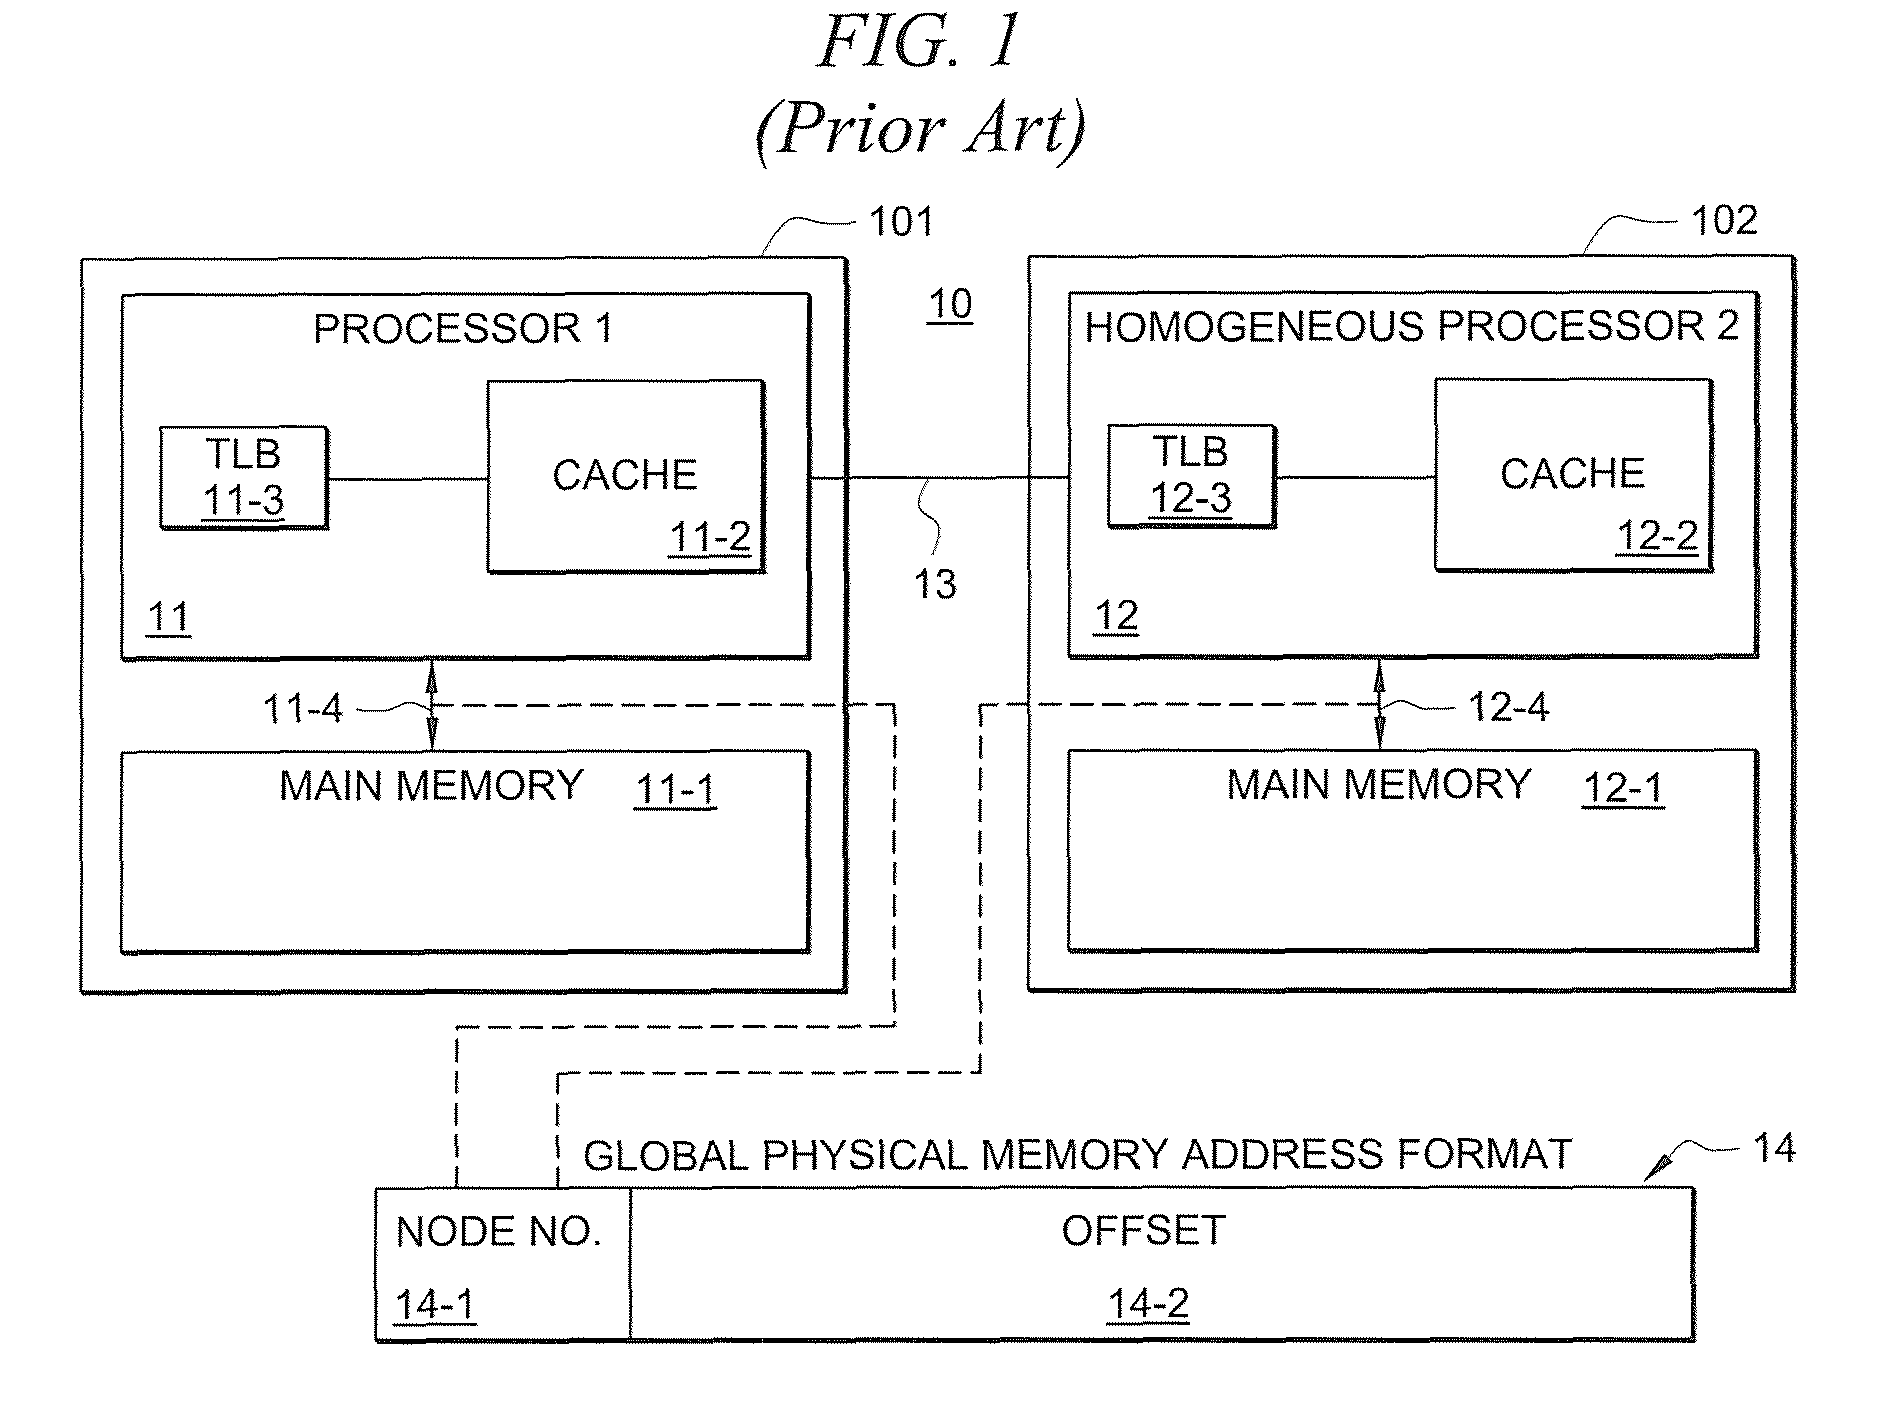 Dispatch mechanism for dispatching instructions from a host processor to a co-processor